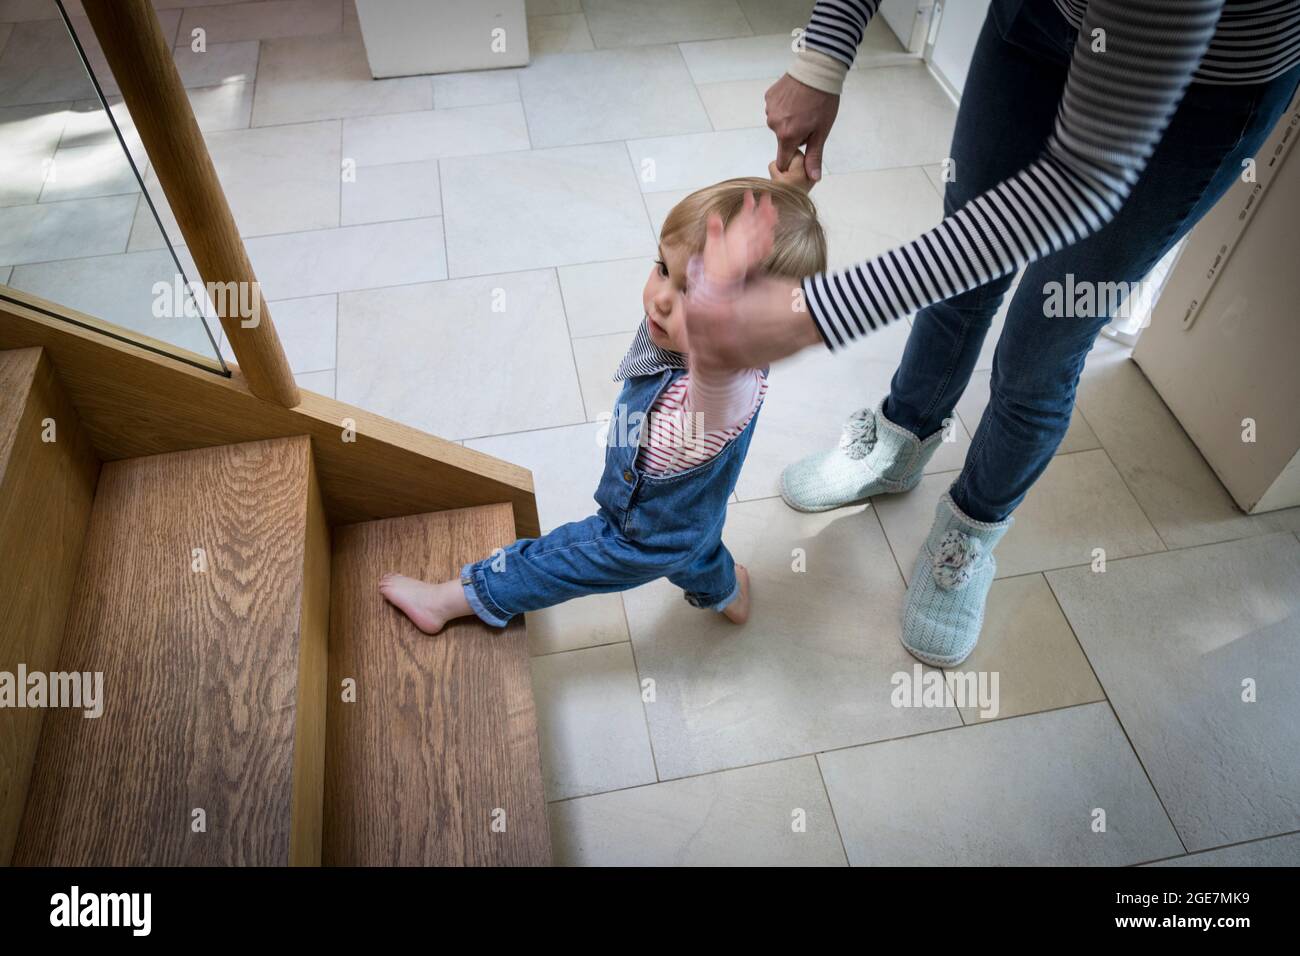 Toddler about to walk up wooden staircase assisted by mother, England. Stock Photo